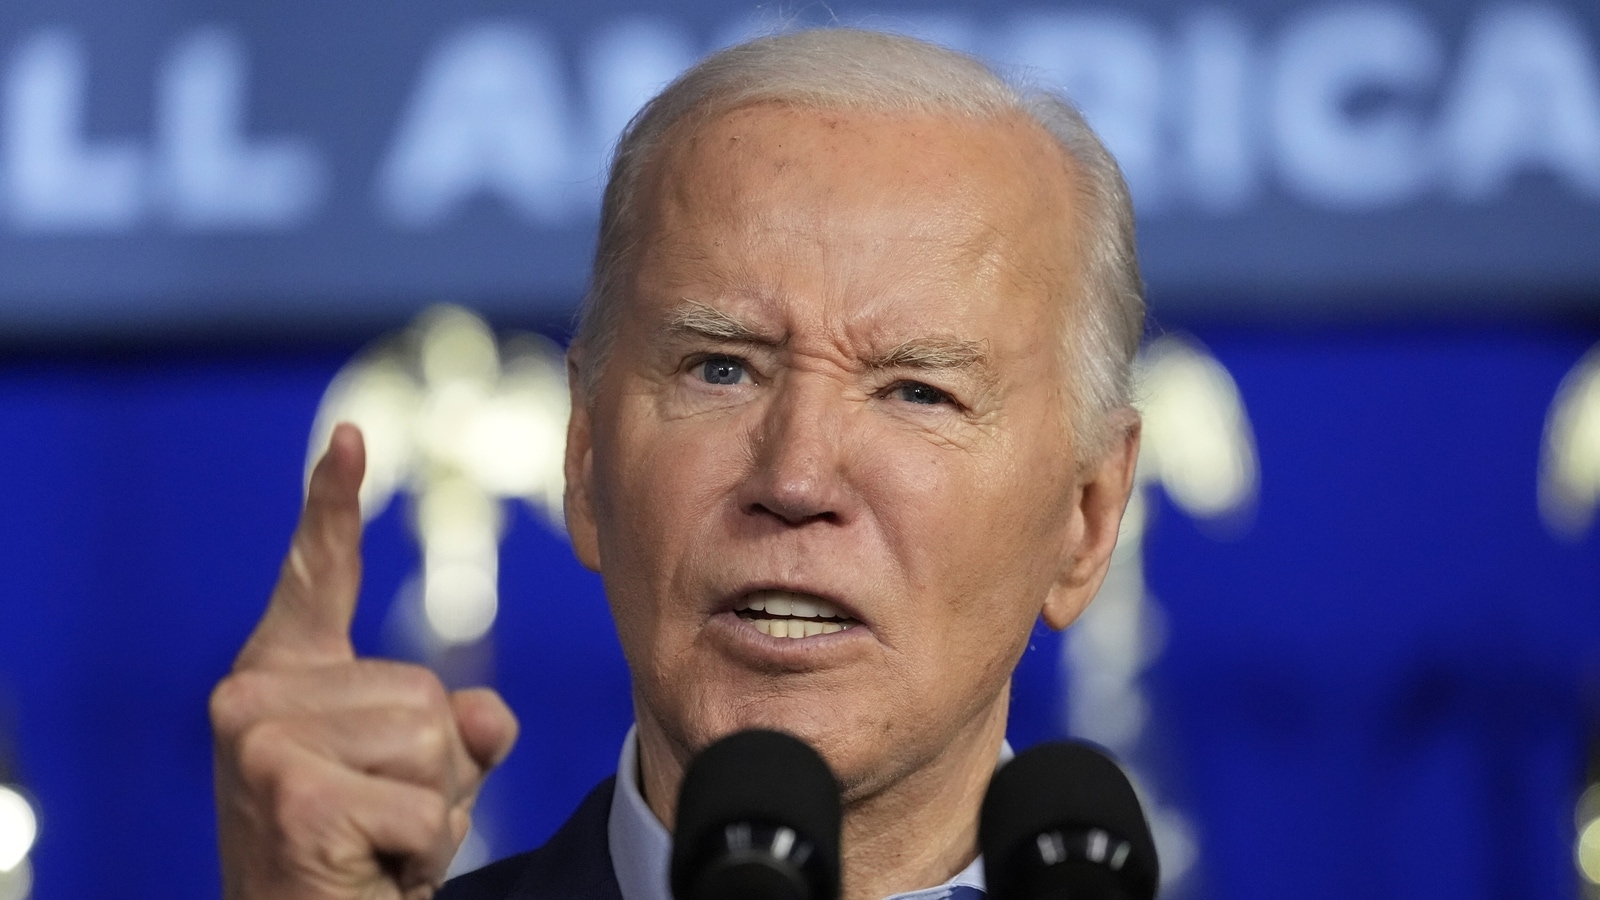 Biden's ‘signs of slipping’ reported by DC insiders: President, 81, ‘not the same person'; cognitive decline noted